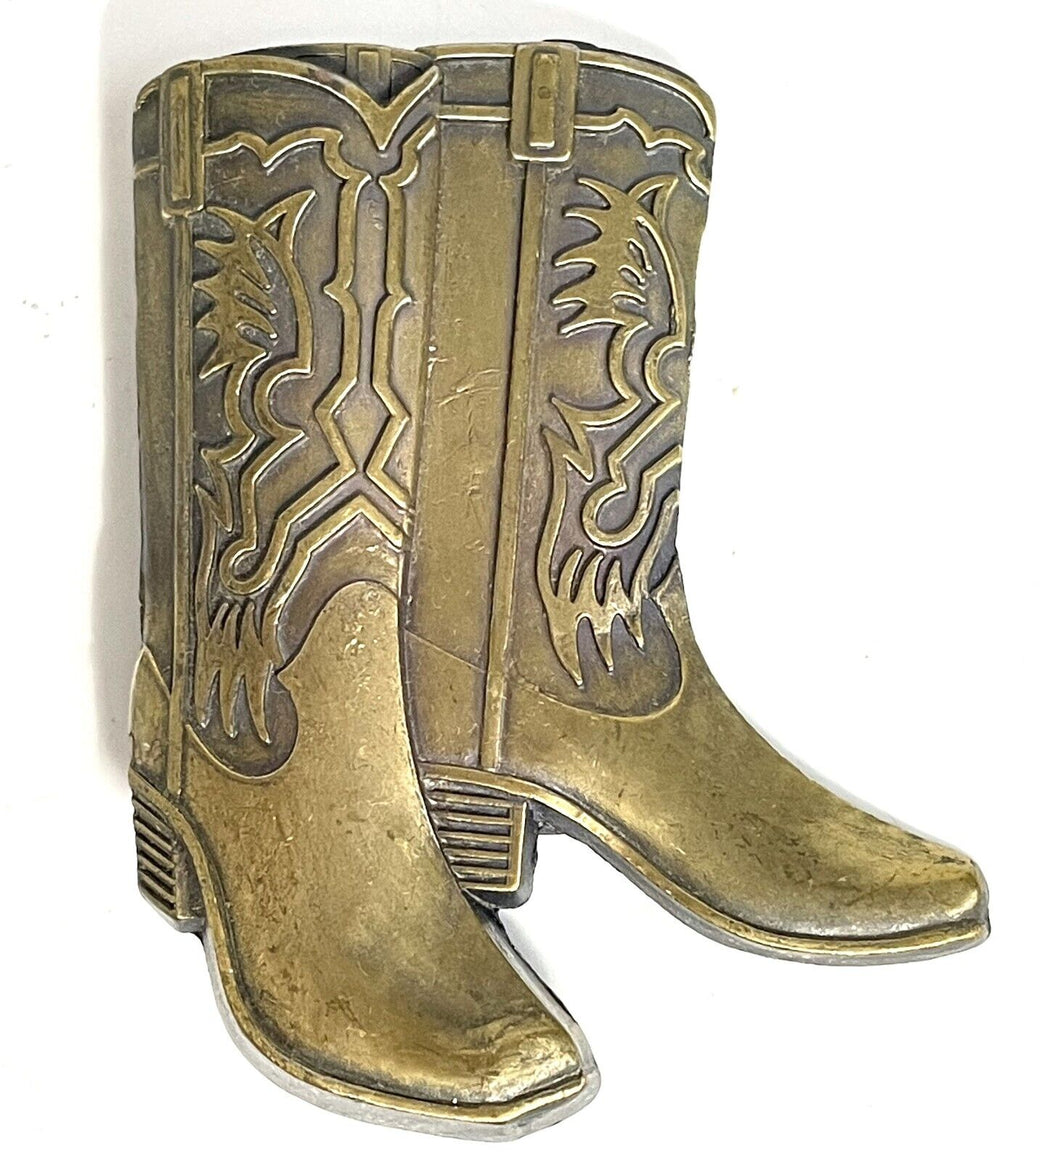 Vintage Small Belt Buckle 1970's Solid Brass Western Rodeo Cowboy Cowgirl Boot